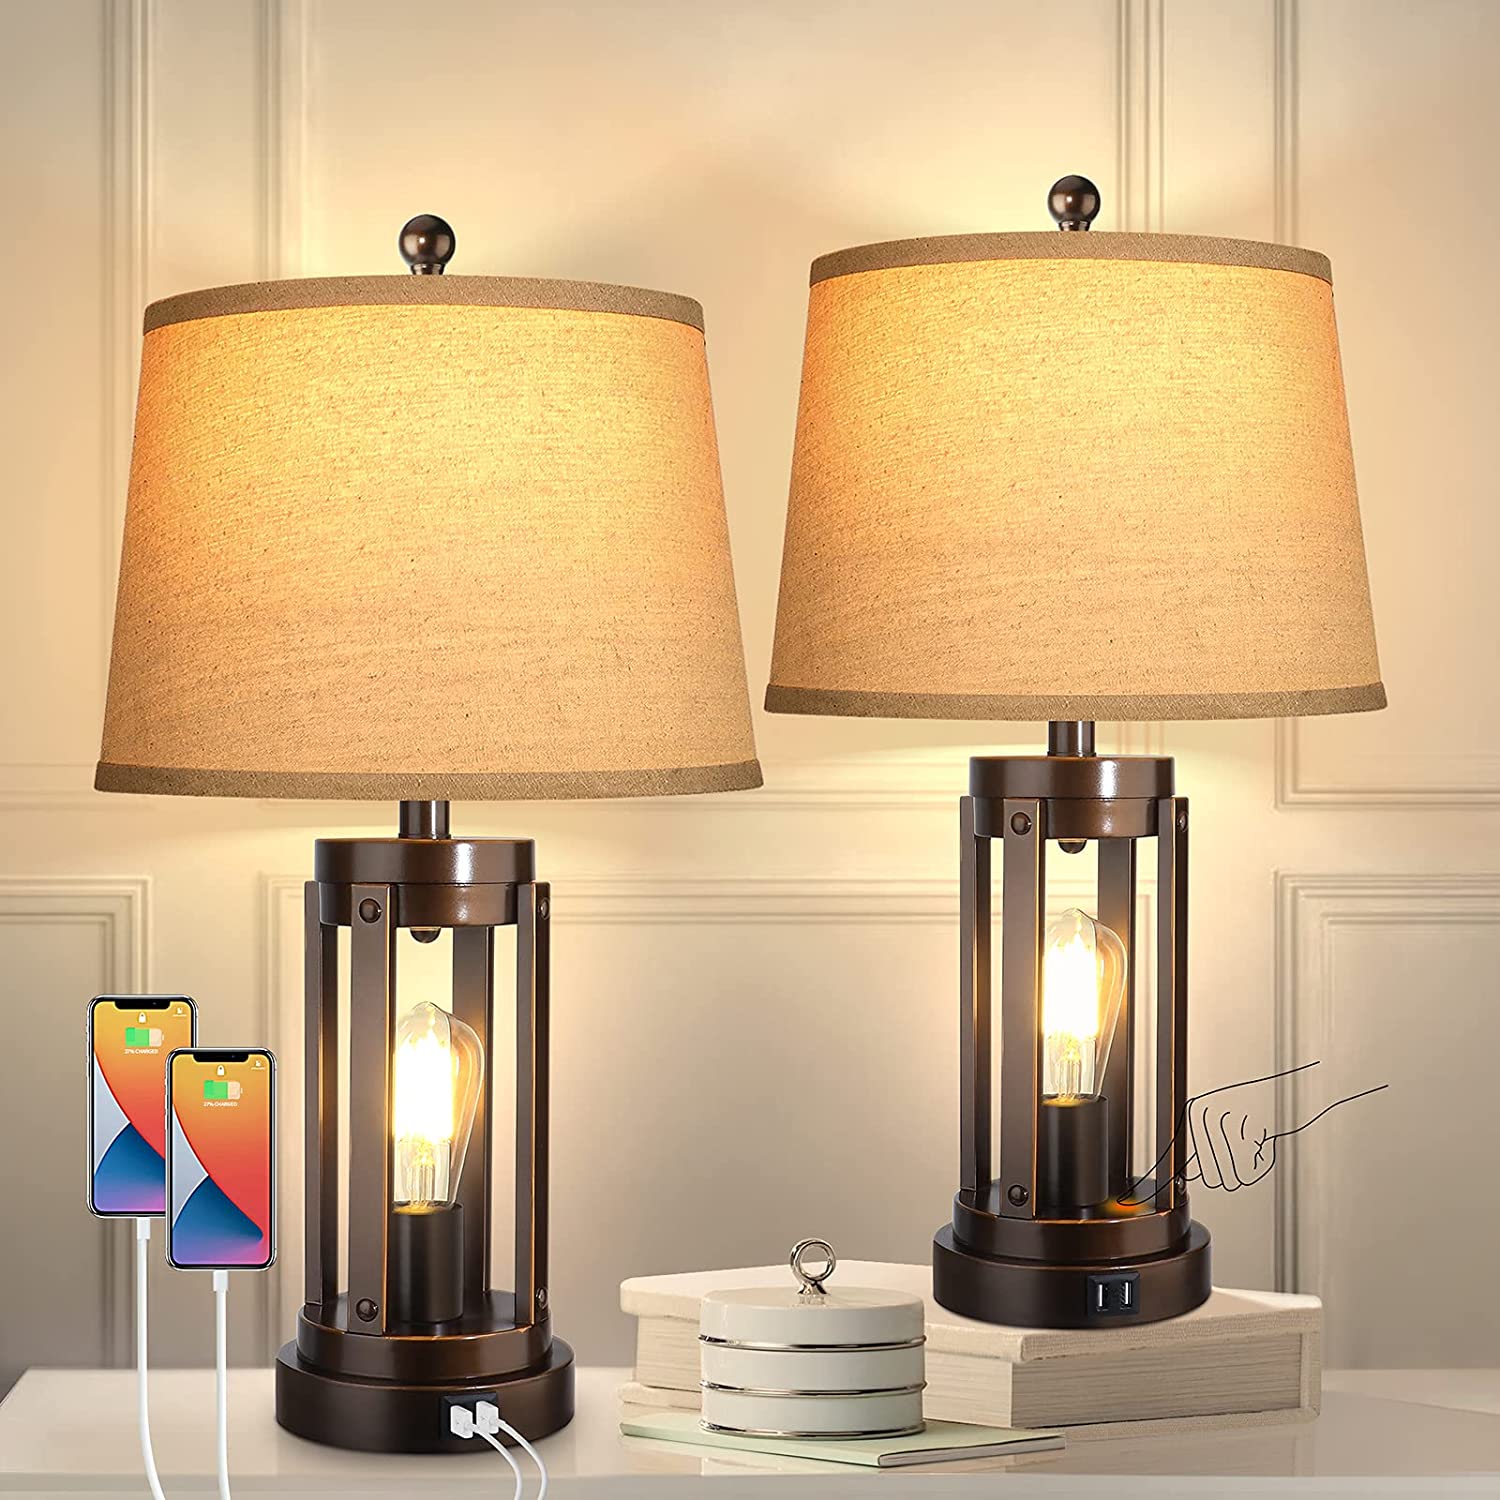 Set of 2 Table Lamps with USB Ports, 3-W